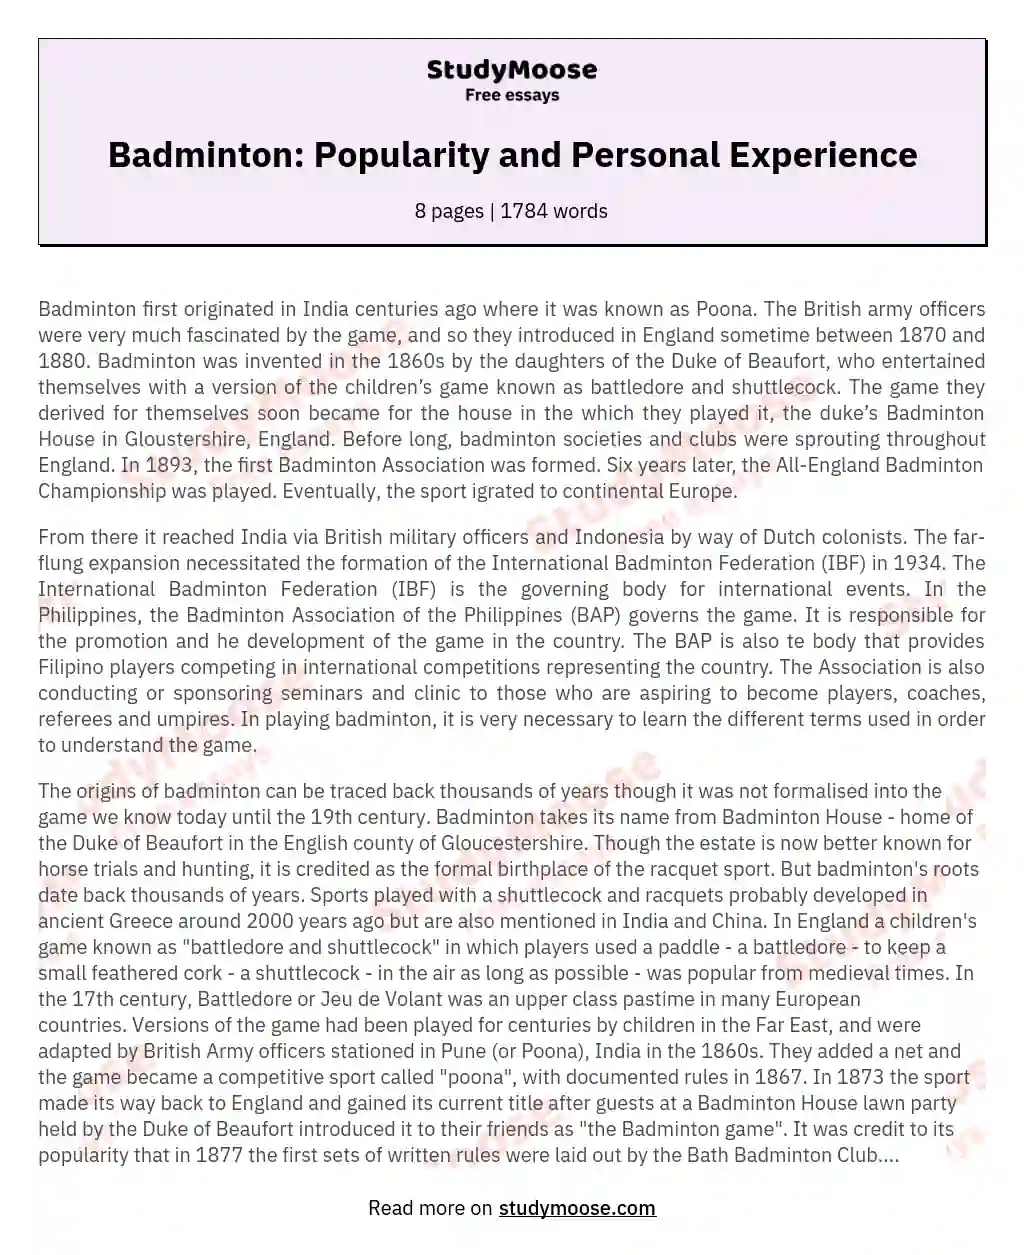 Badminton: Popularity and Personal Experience